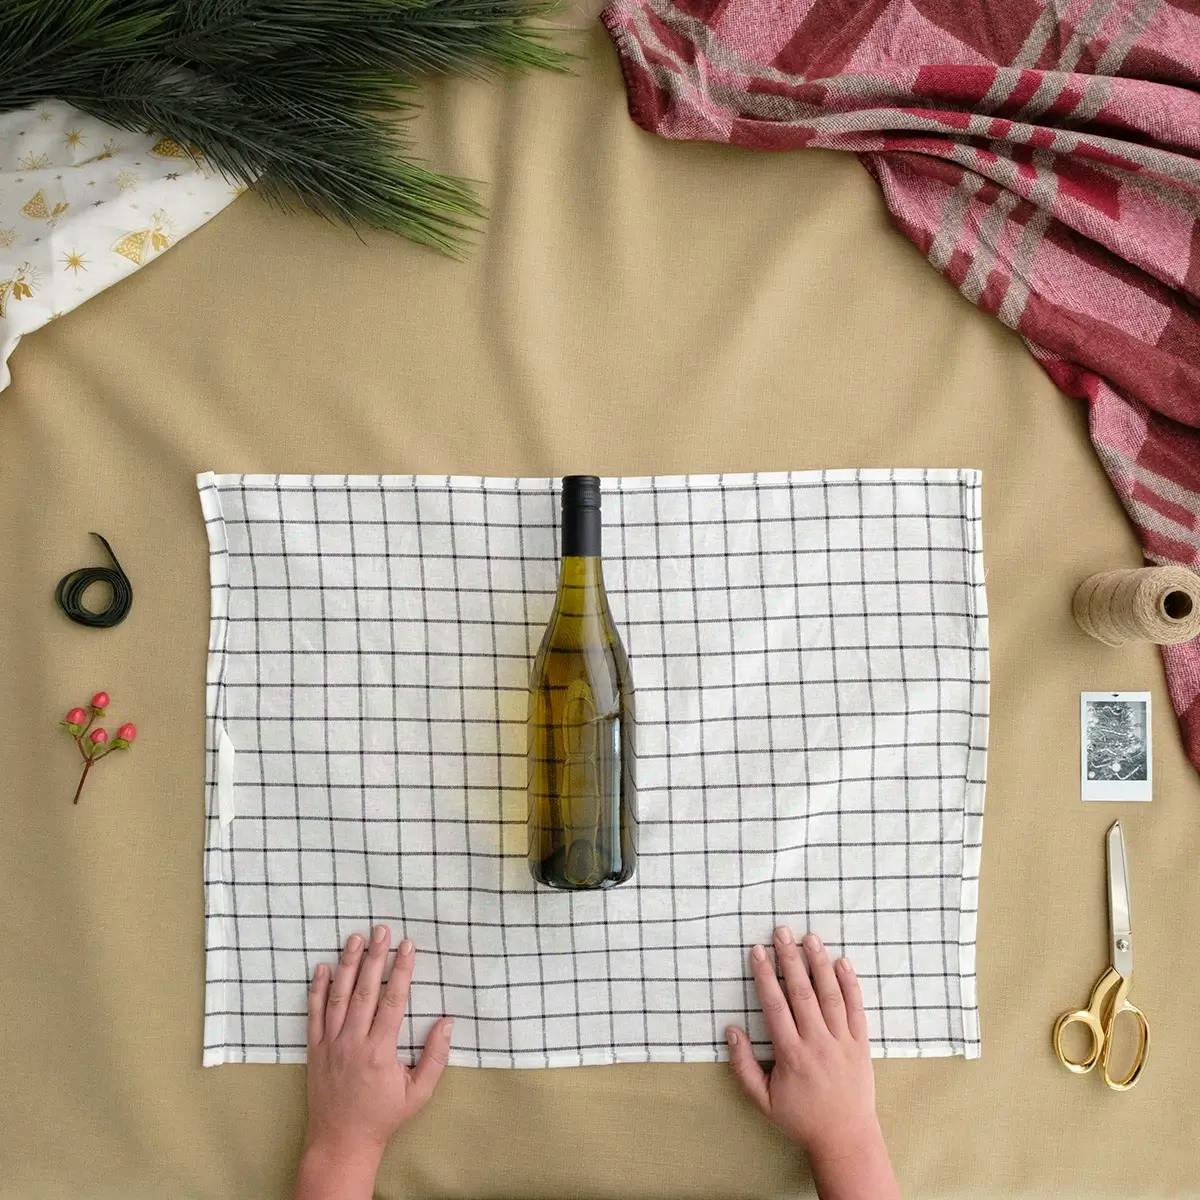 Tutorial on how to wrap a wine bottle, showing step 1: laying the wind bottle on the tea towel.